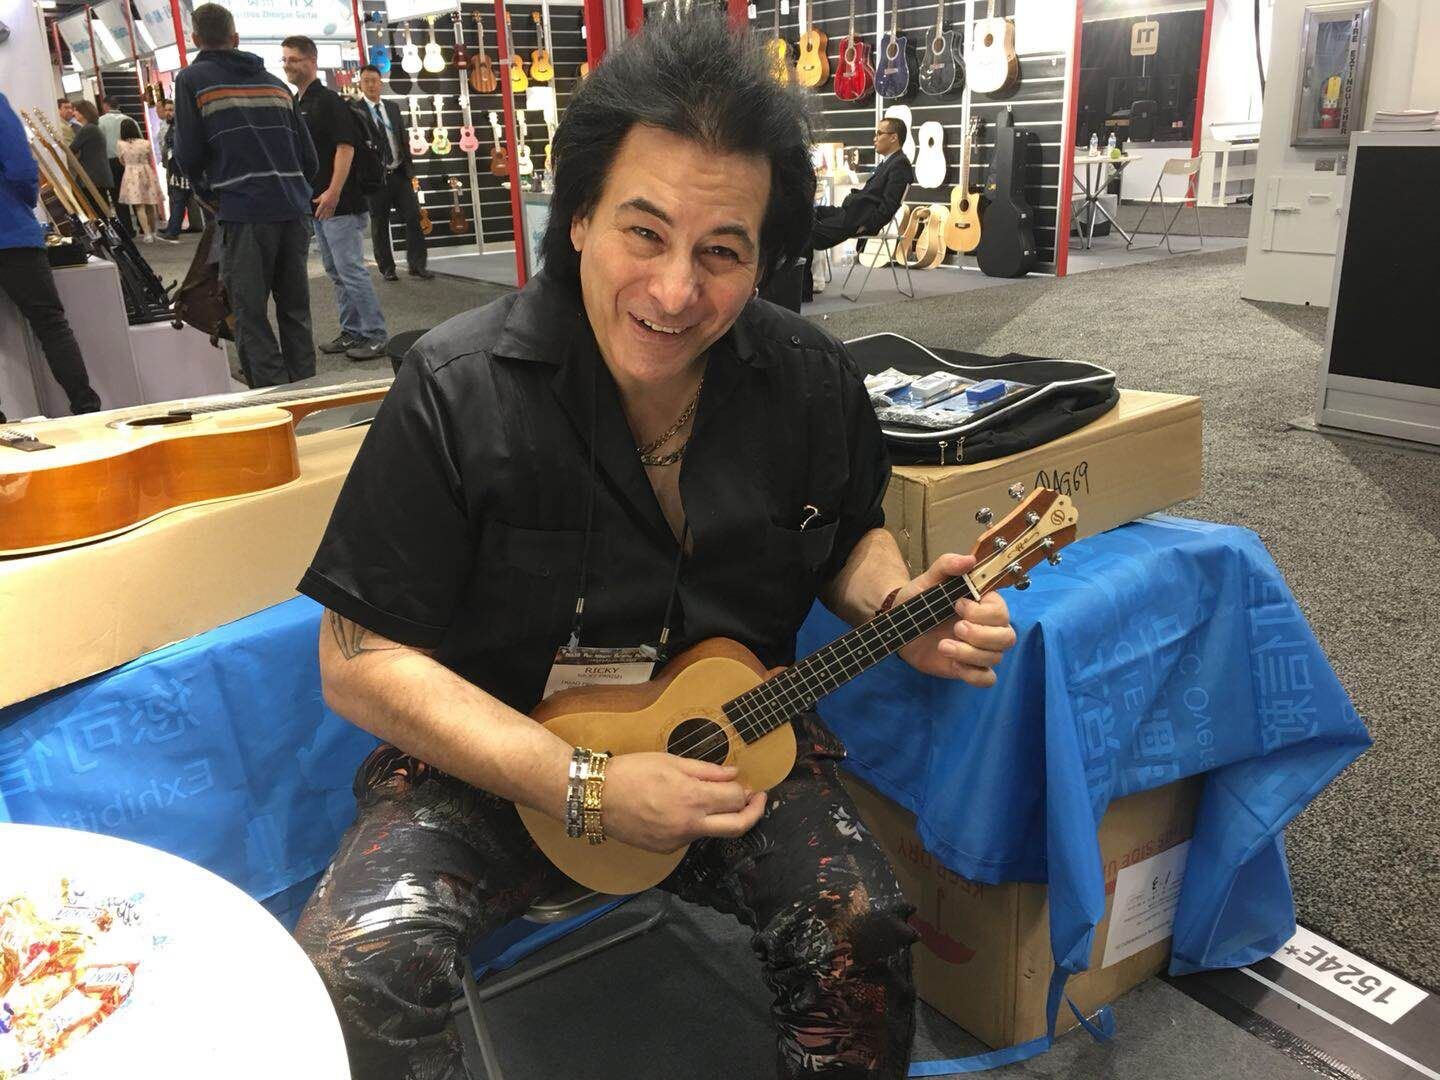 2018 American Musical Instrument Exhibition